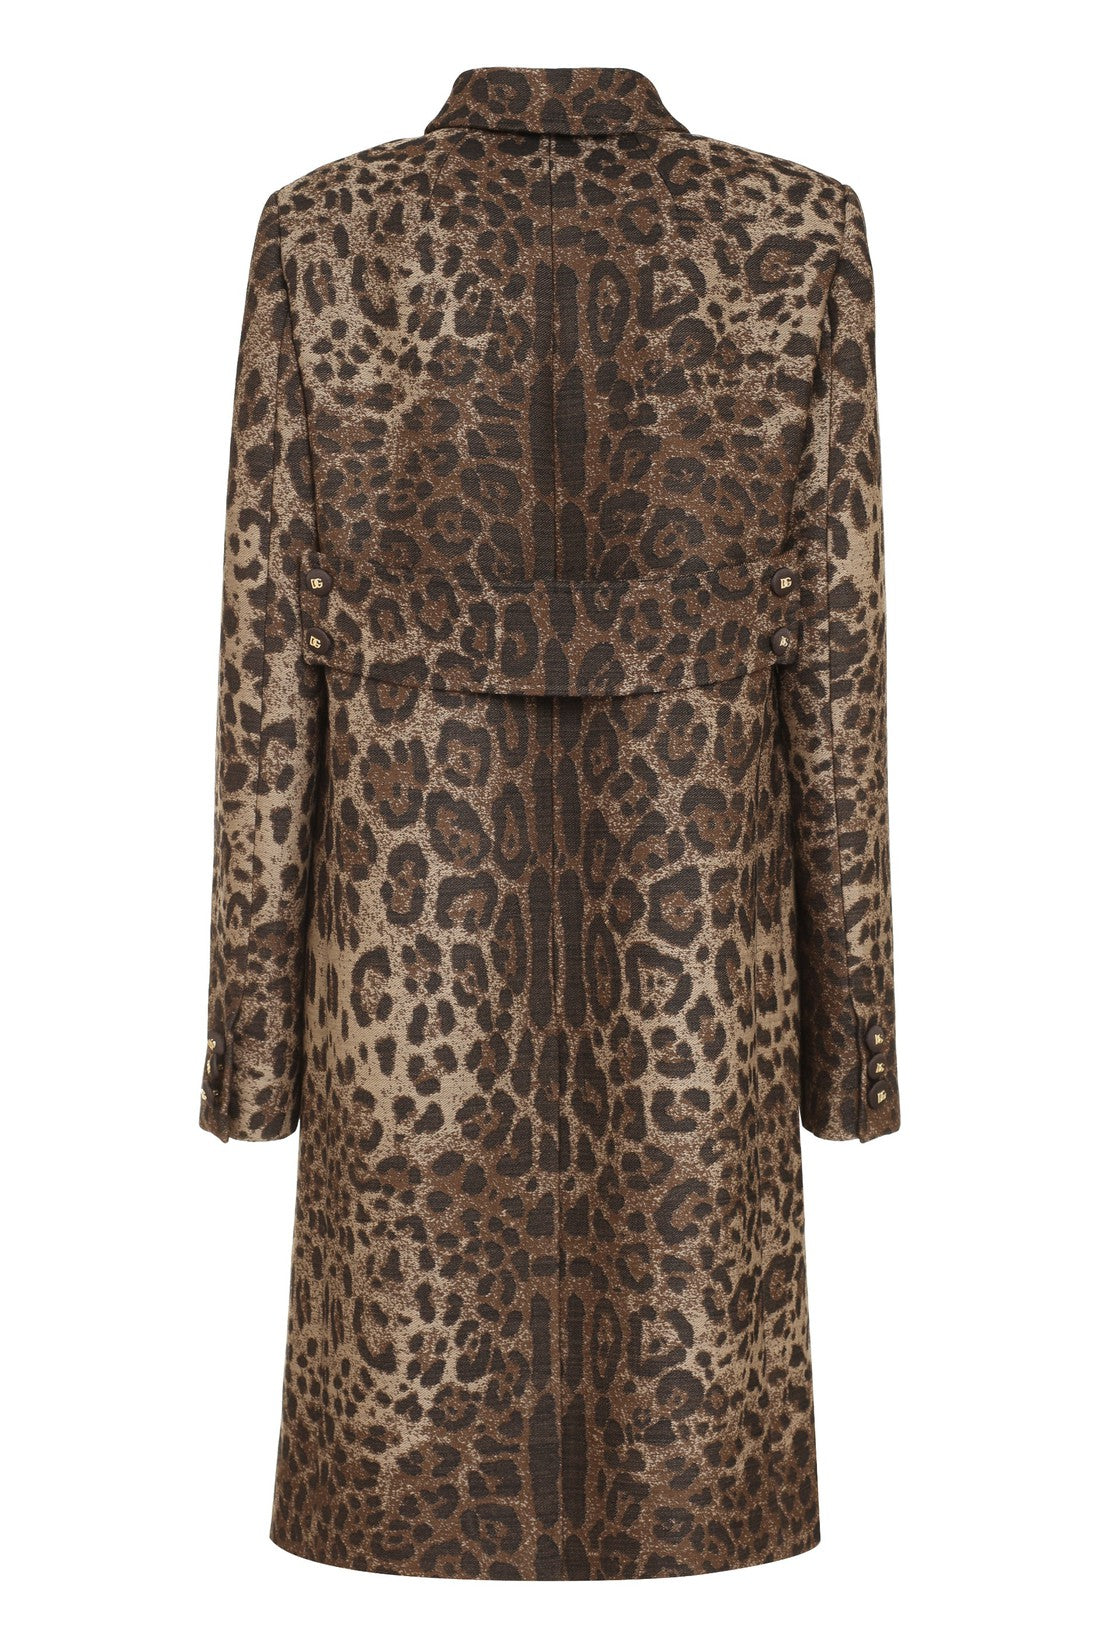 Dolce & Gabbana-OUTLET-SALE-Single-breasted wool coat-ARCHIVIST